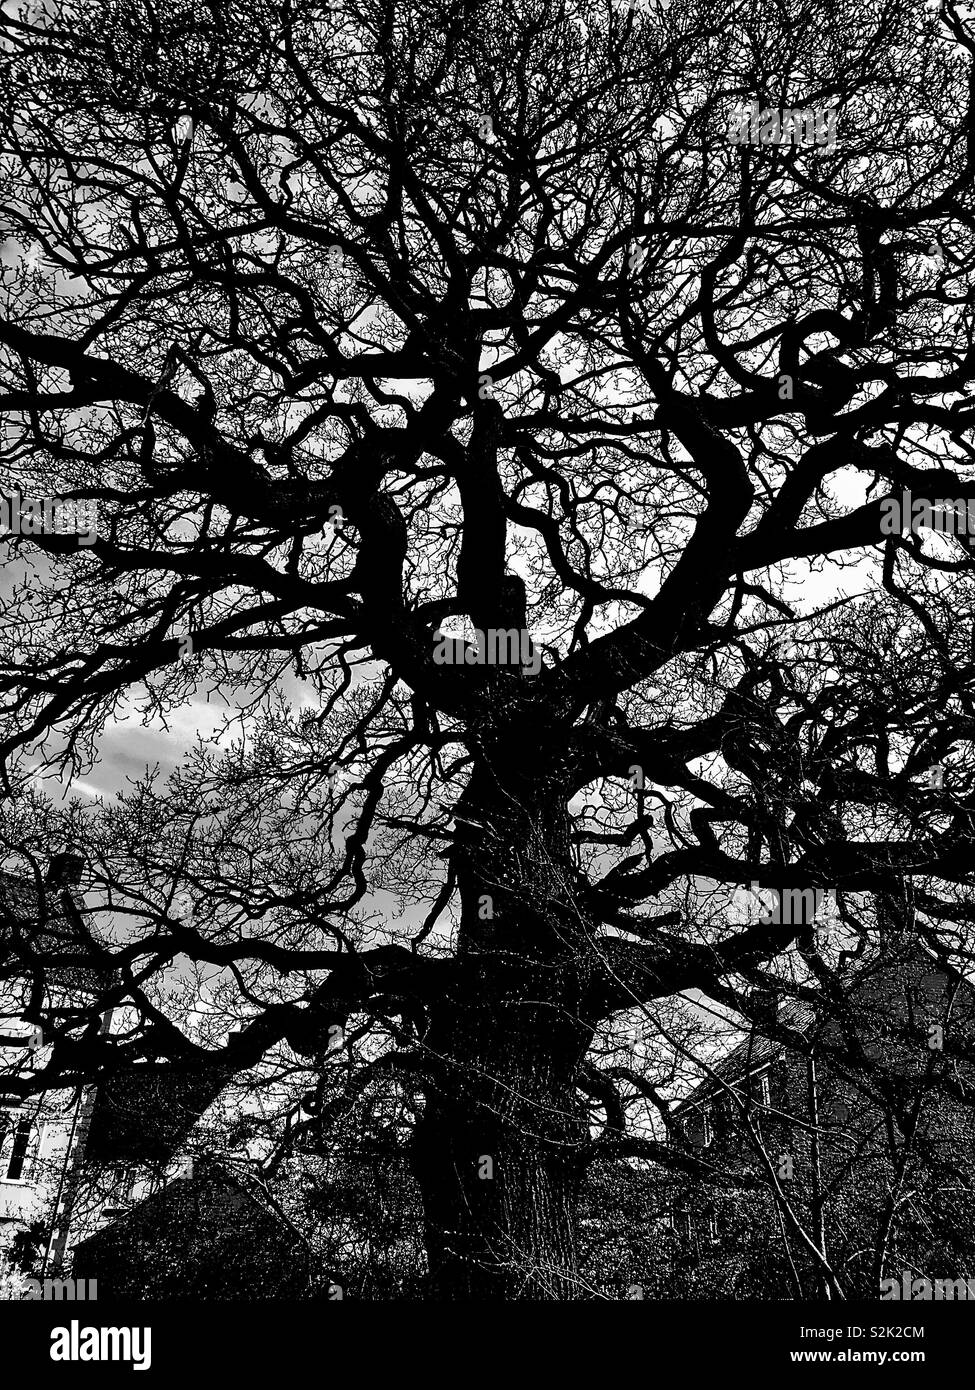 Black and white winter leafless oak tree with housing behind Stock Photo